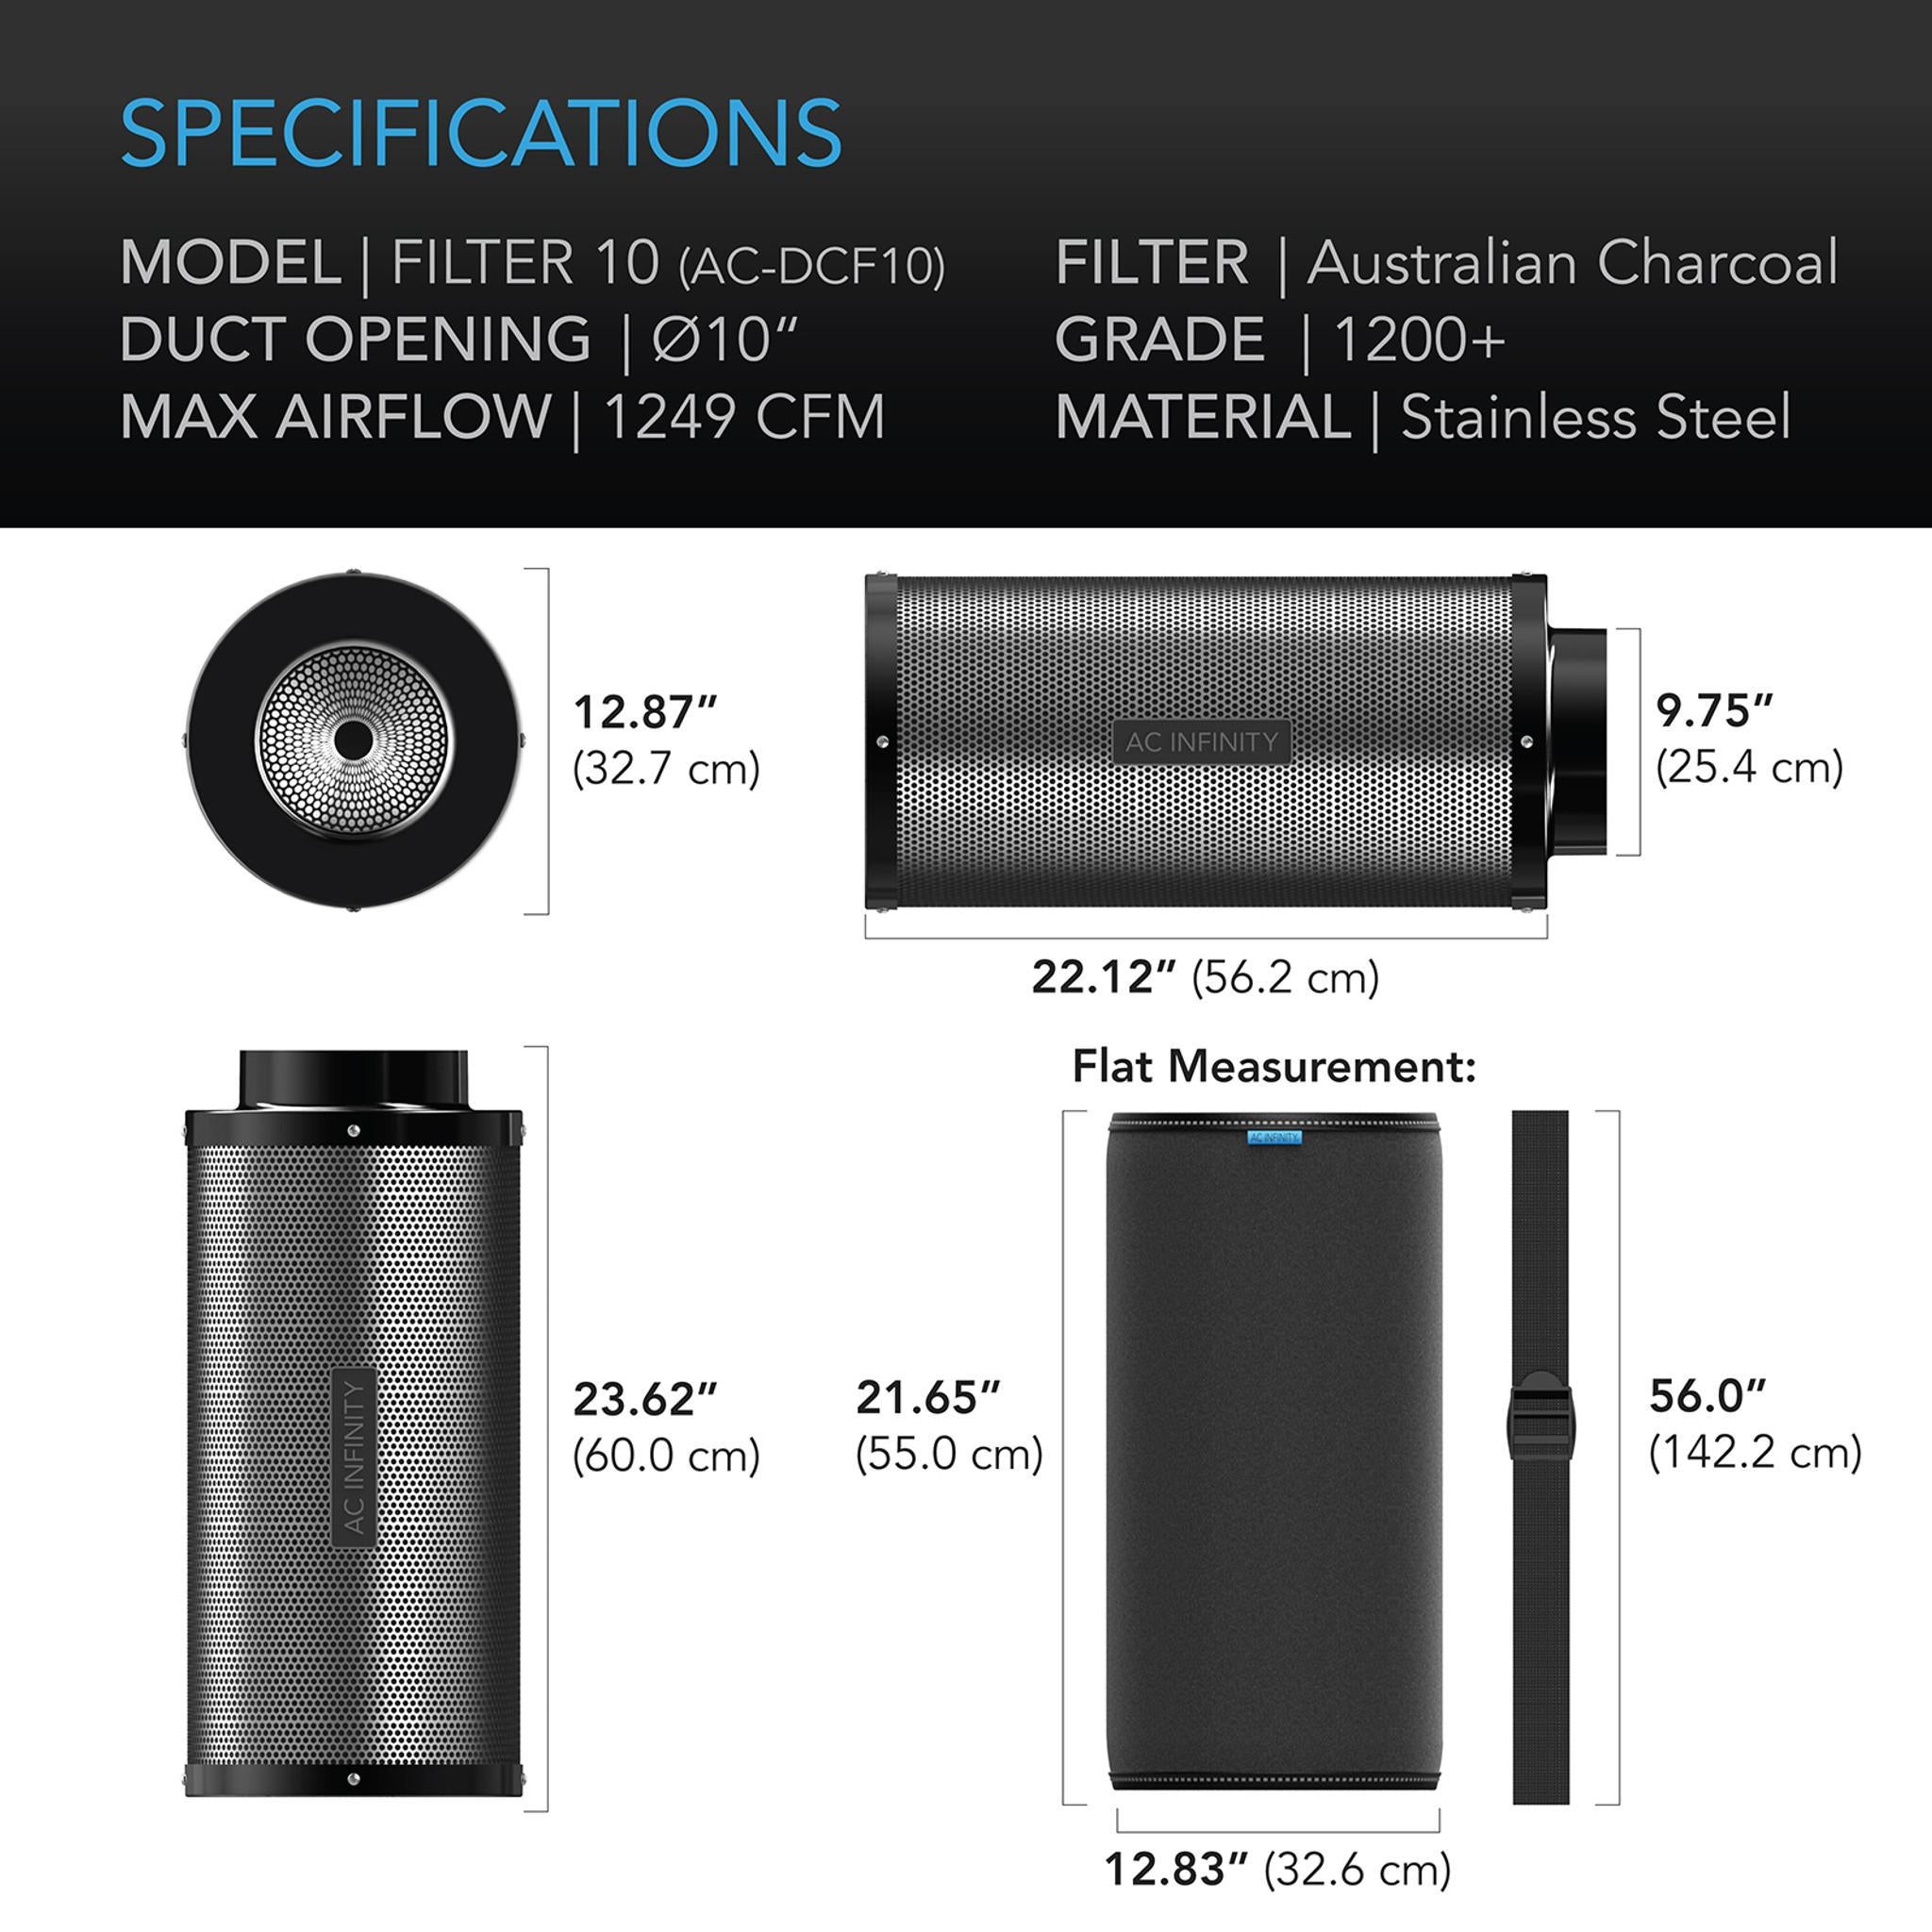 300mm AC Infinity Carbon Filter specs